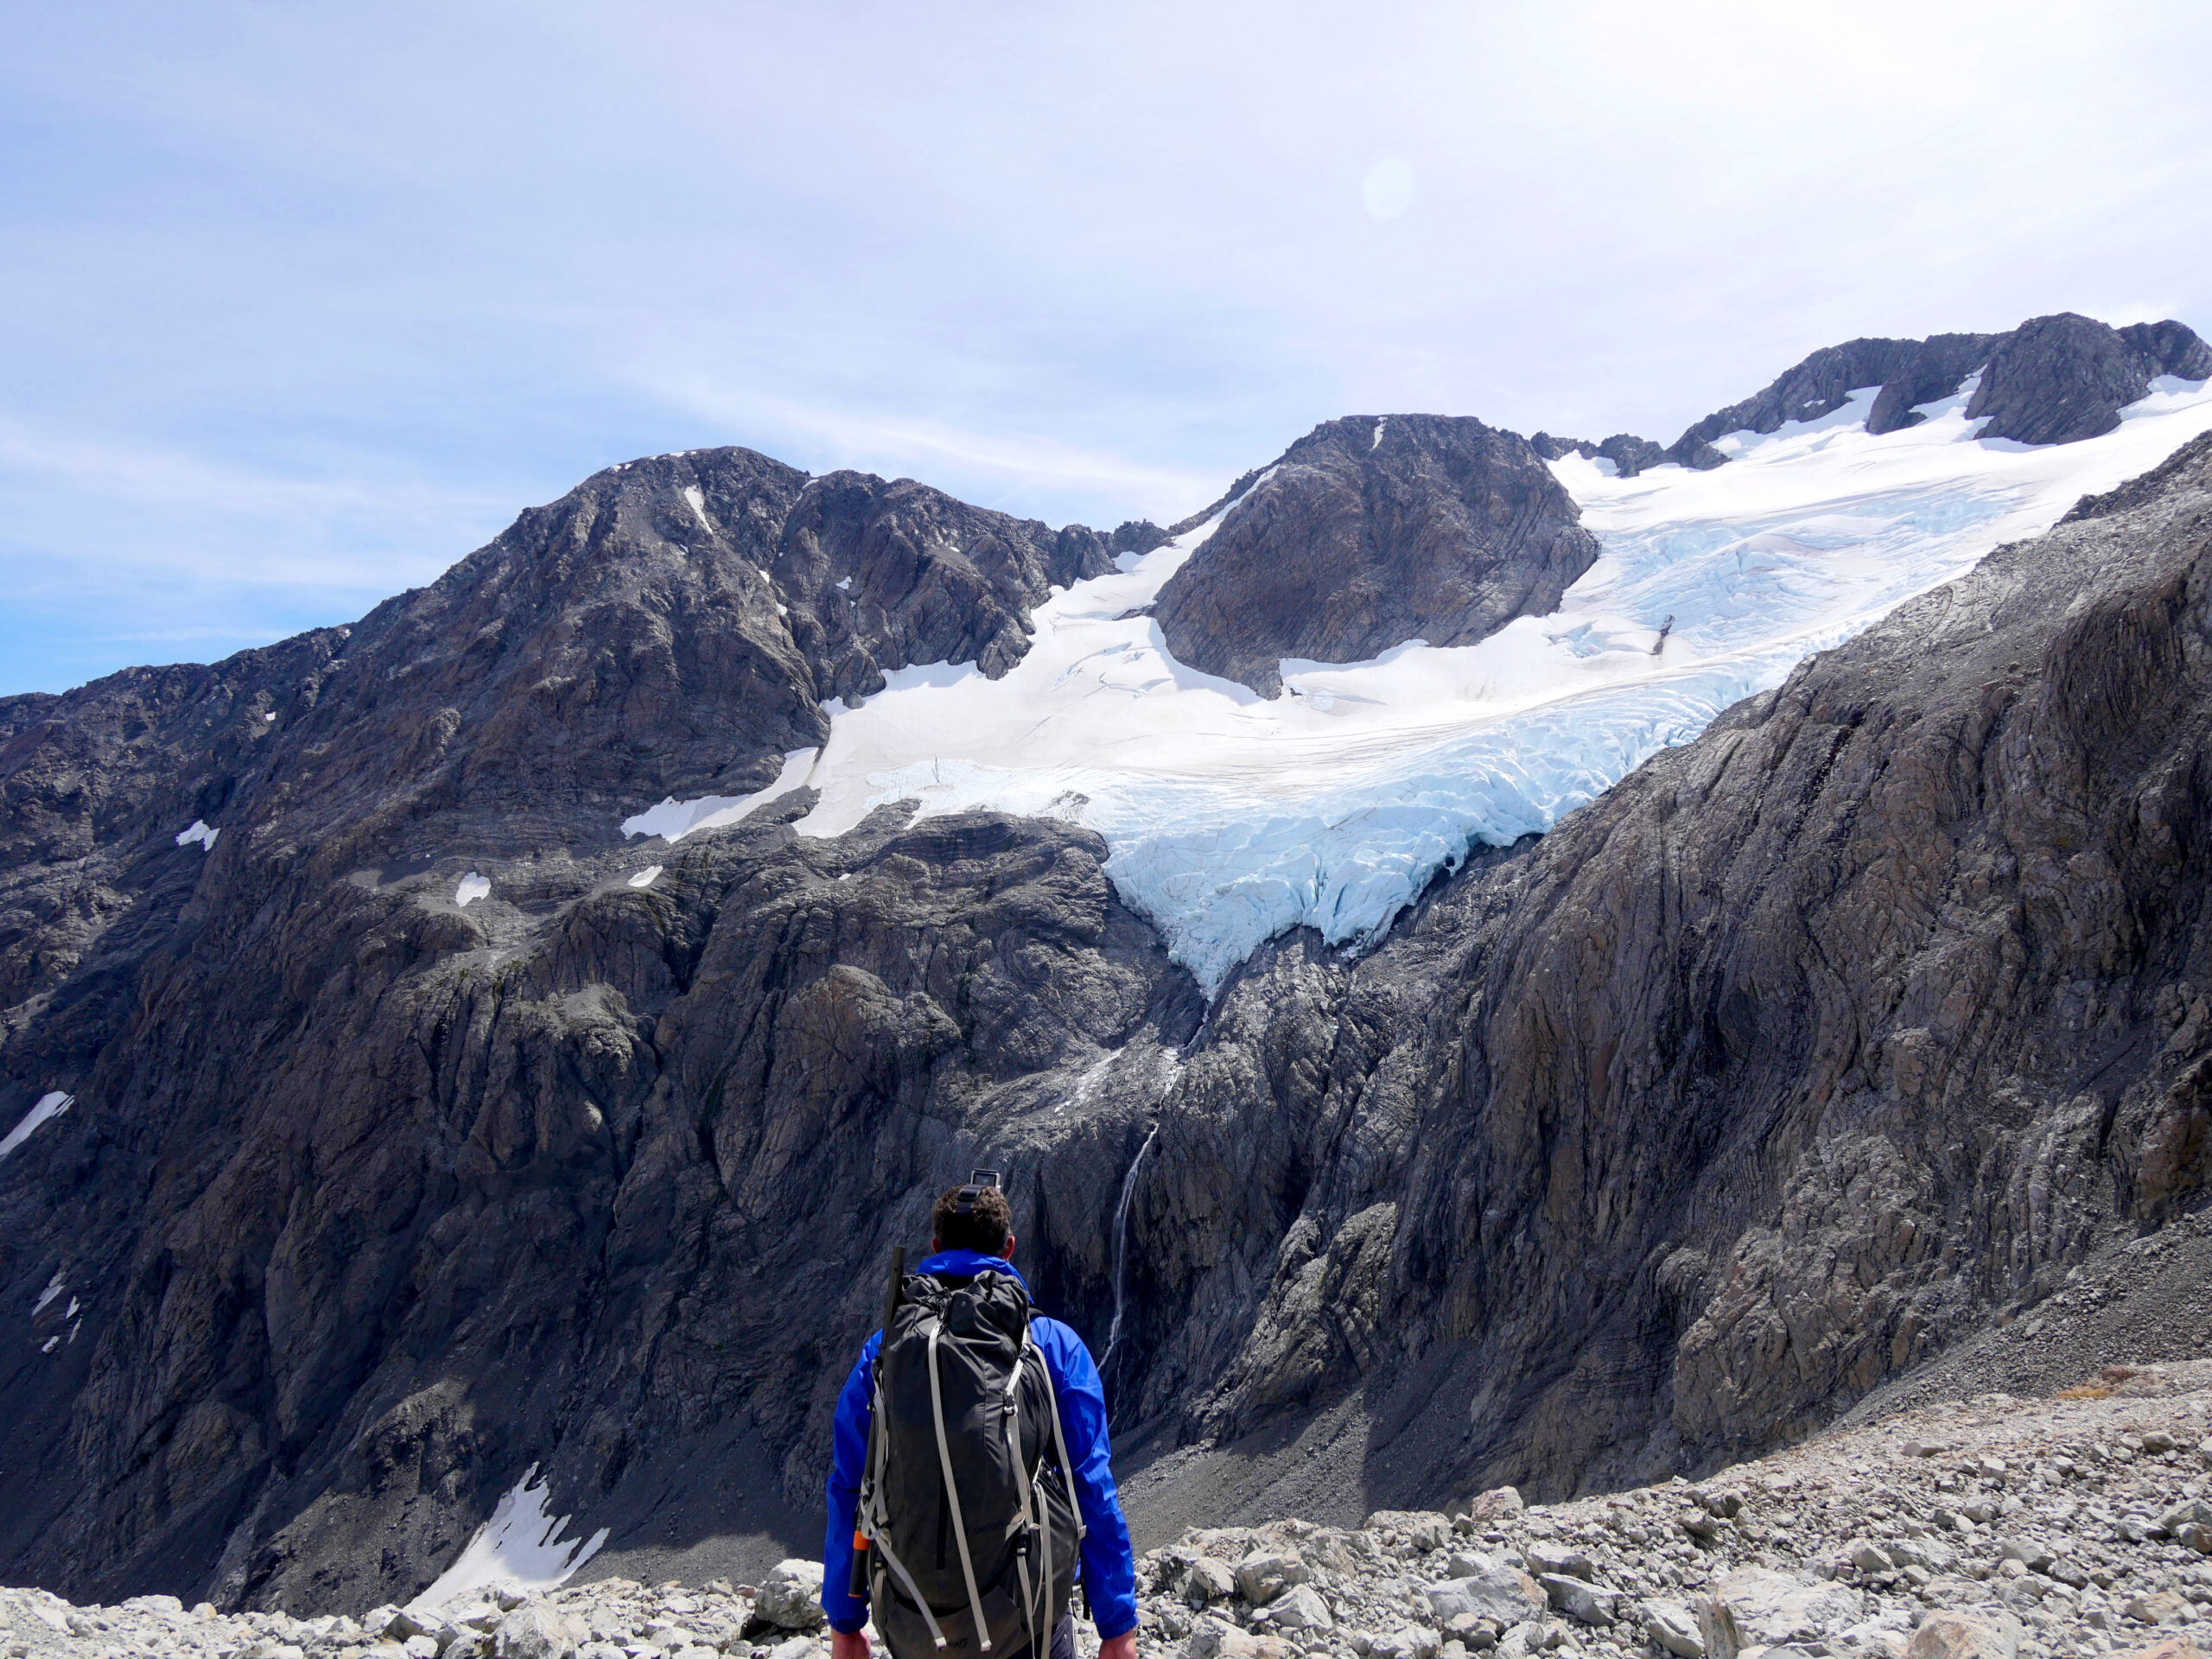 A hiker looks at Cronin Glacier above Whitehorn Pass in Arthur's Pass National Park, New Zealand.